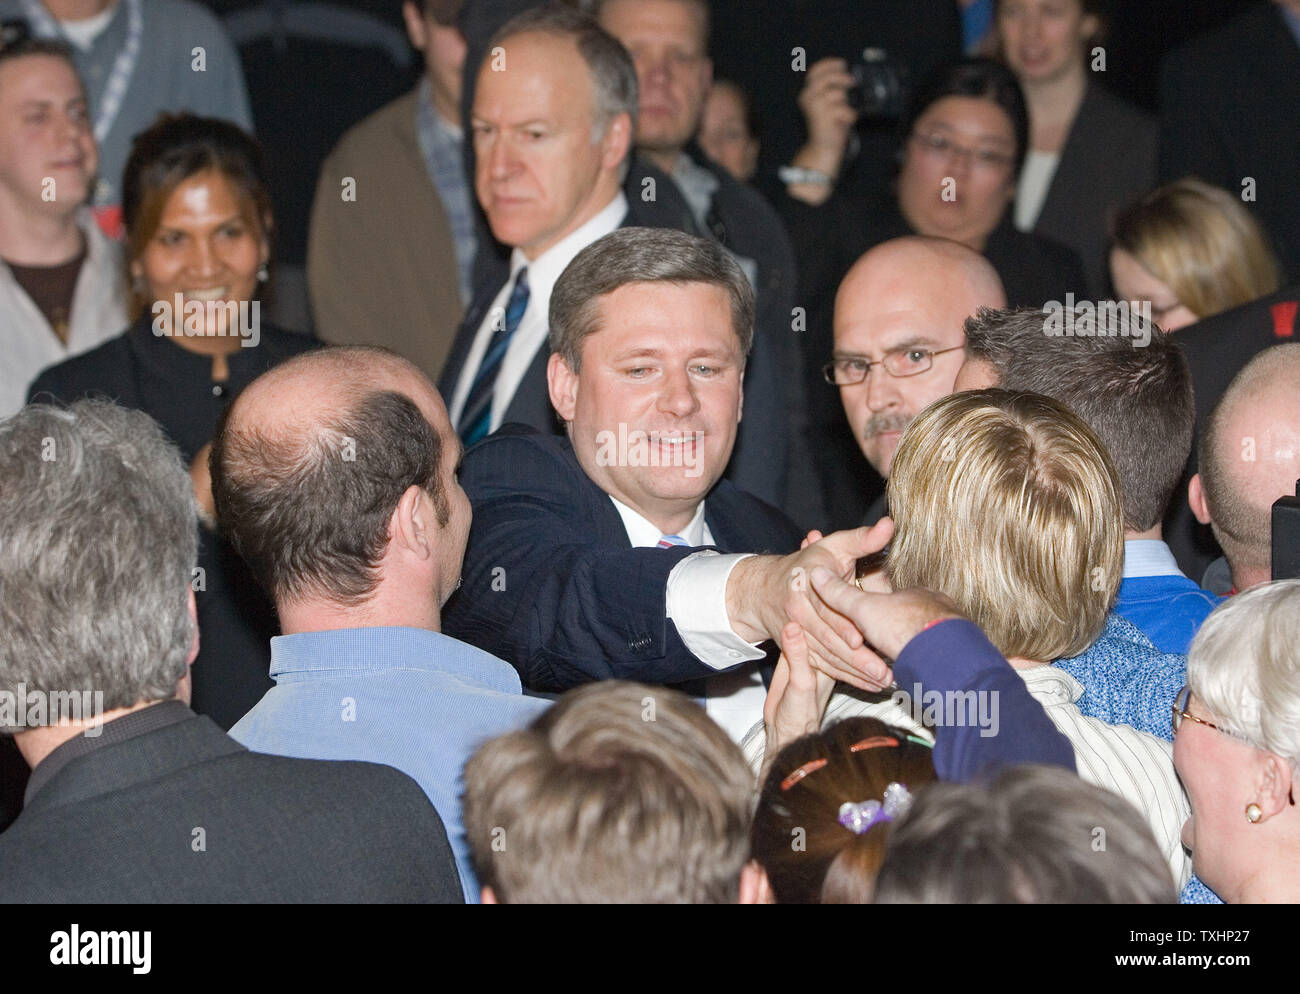 Federal Conservative leader Stephen Harper greets supporters at his campaign headquarters in the Telus Convention Center in Calgary, Alberta after winning the Canada federal election with a minority, January 23, 2006. (UPI Photo/Heinz Ruckemann) Stock Photo